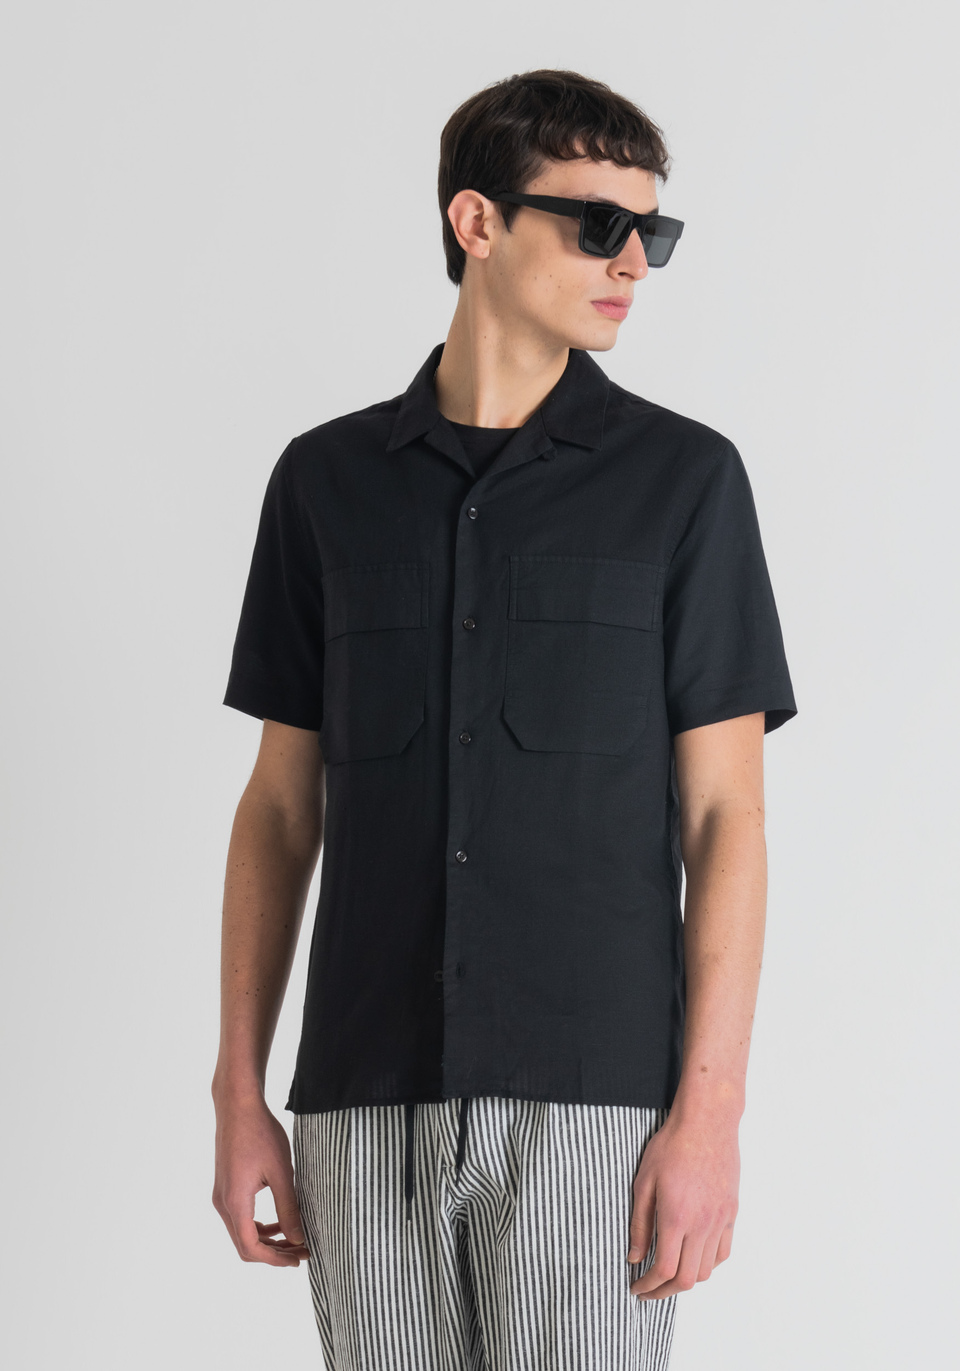 OVERSIZED LINEN BLEND SHIRT WITH BOWLING STYLE COLLAR - Antony Morato Online Shop